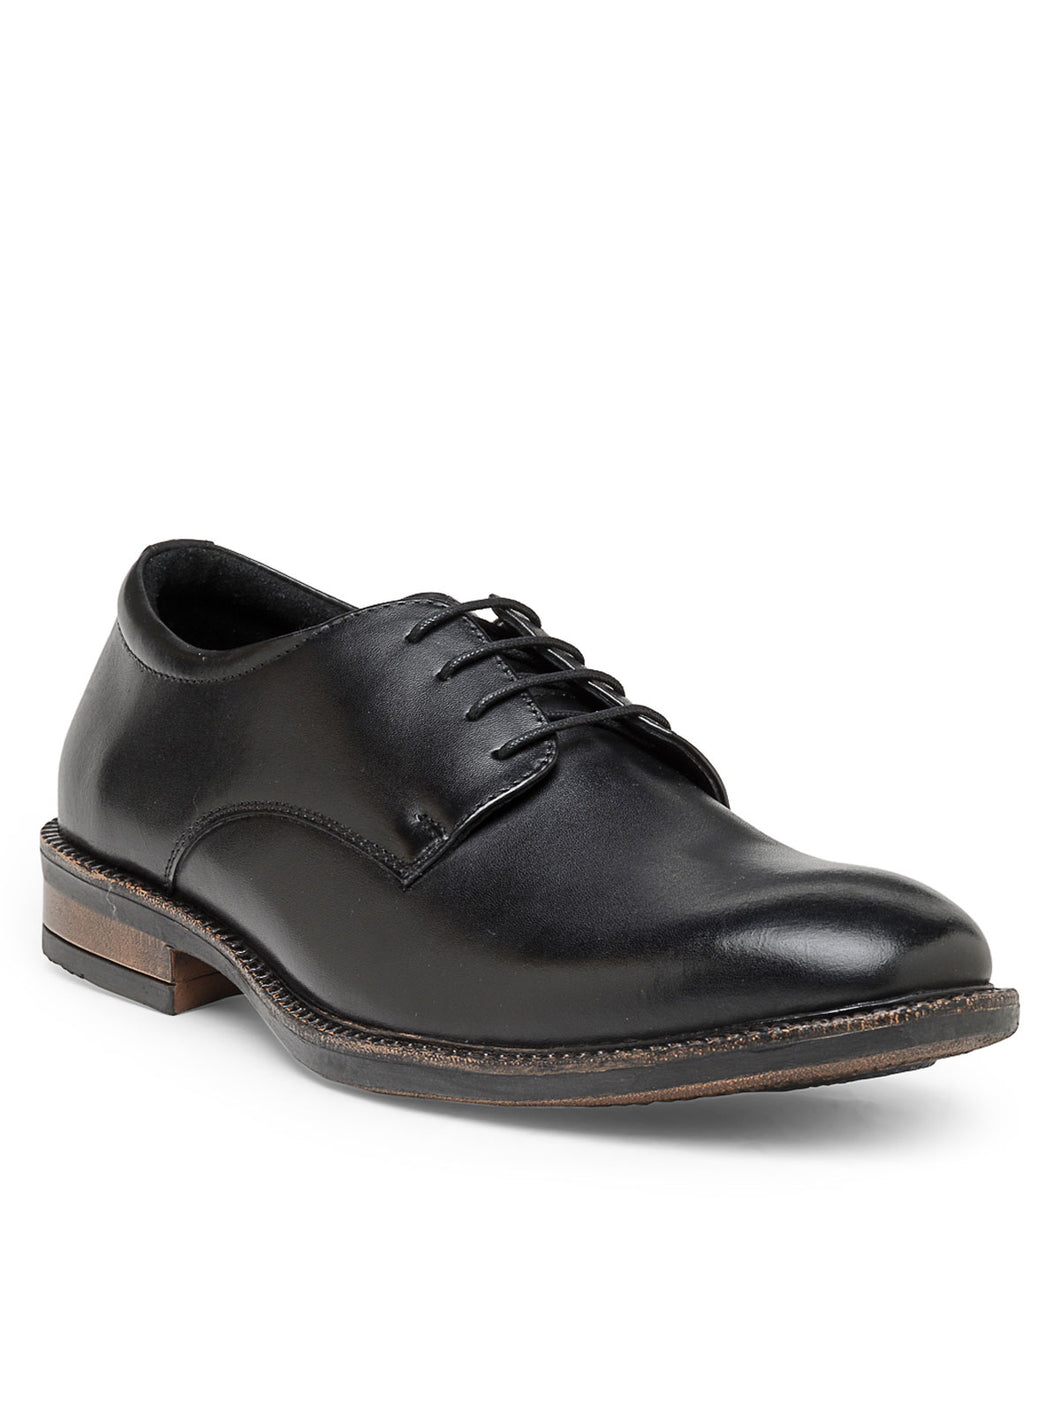 Teakwood Men's Real Leather Shoes